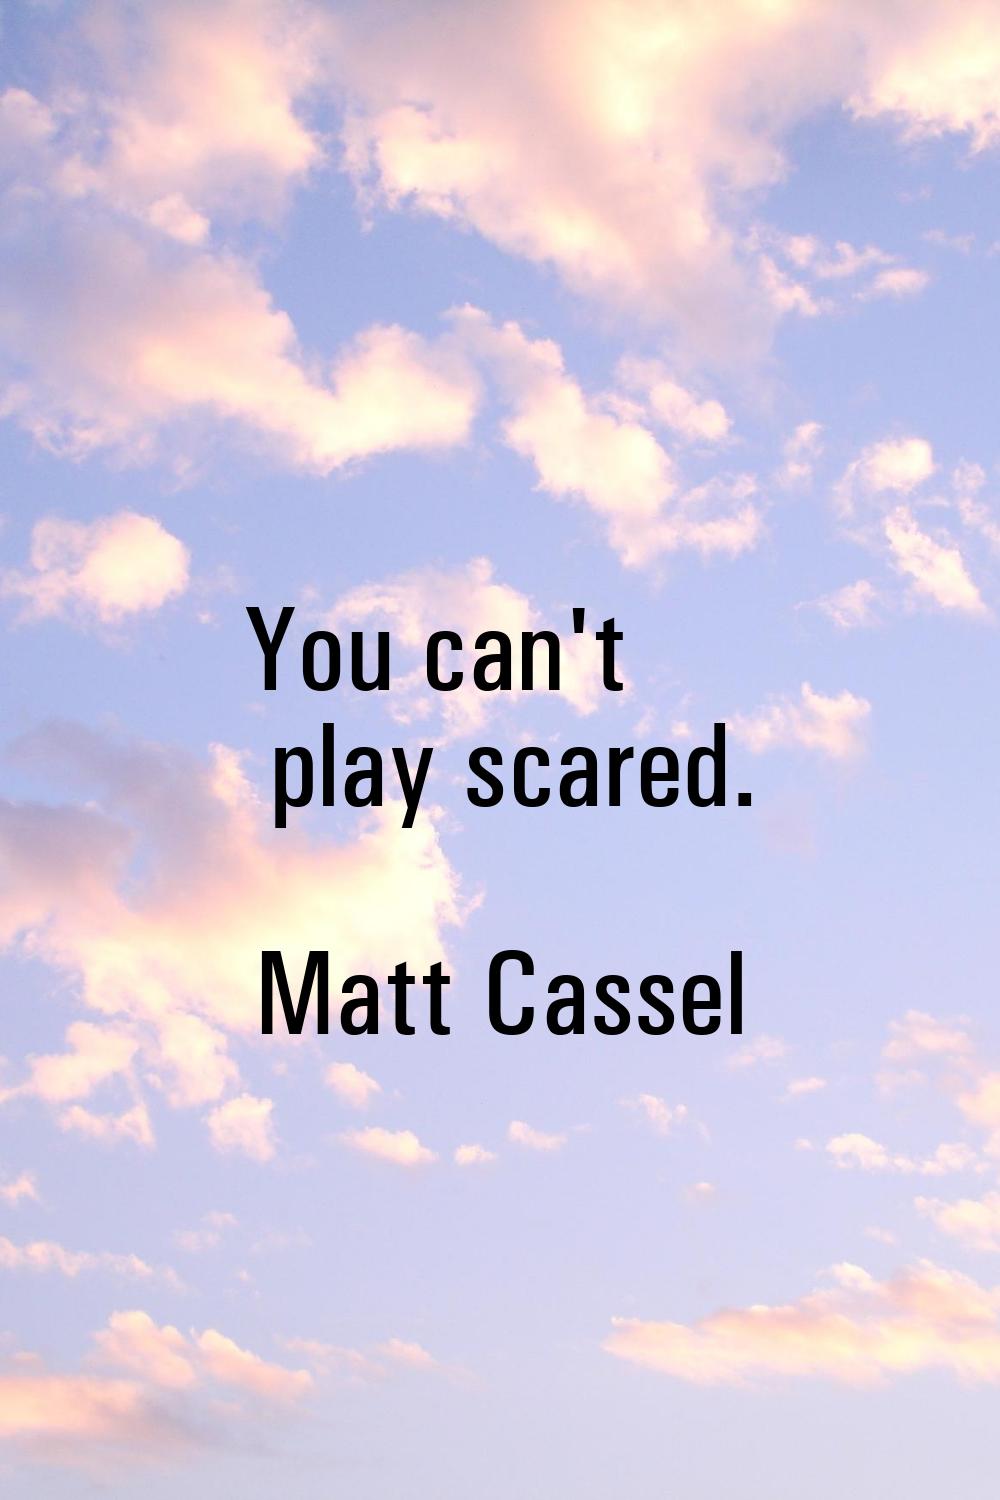 You can't play scared.